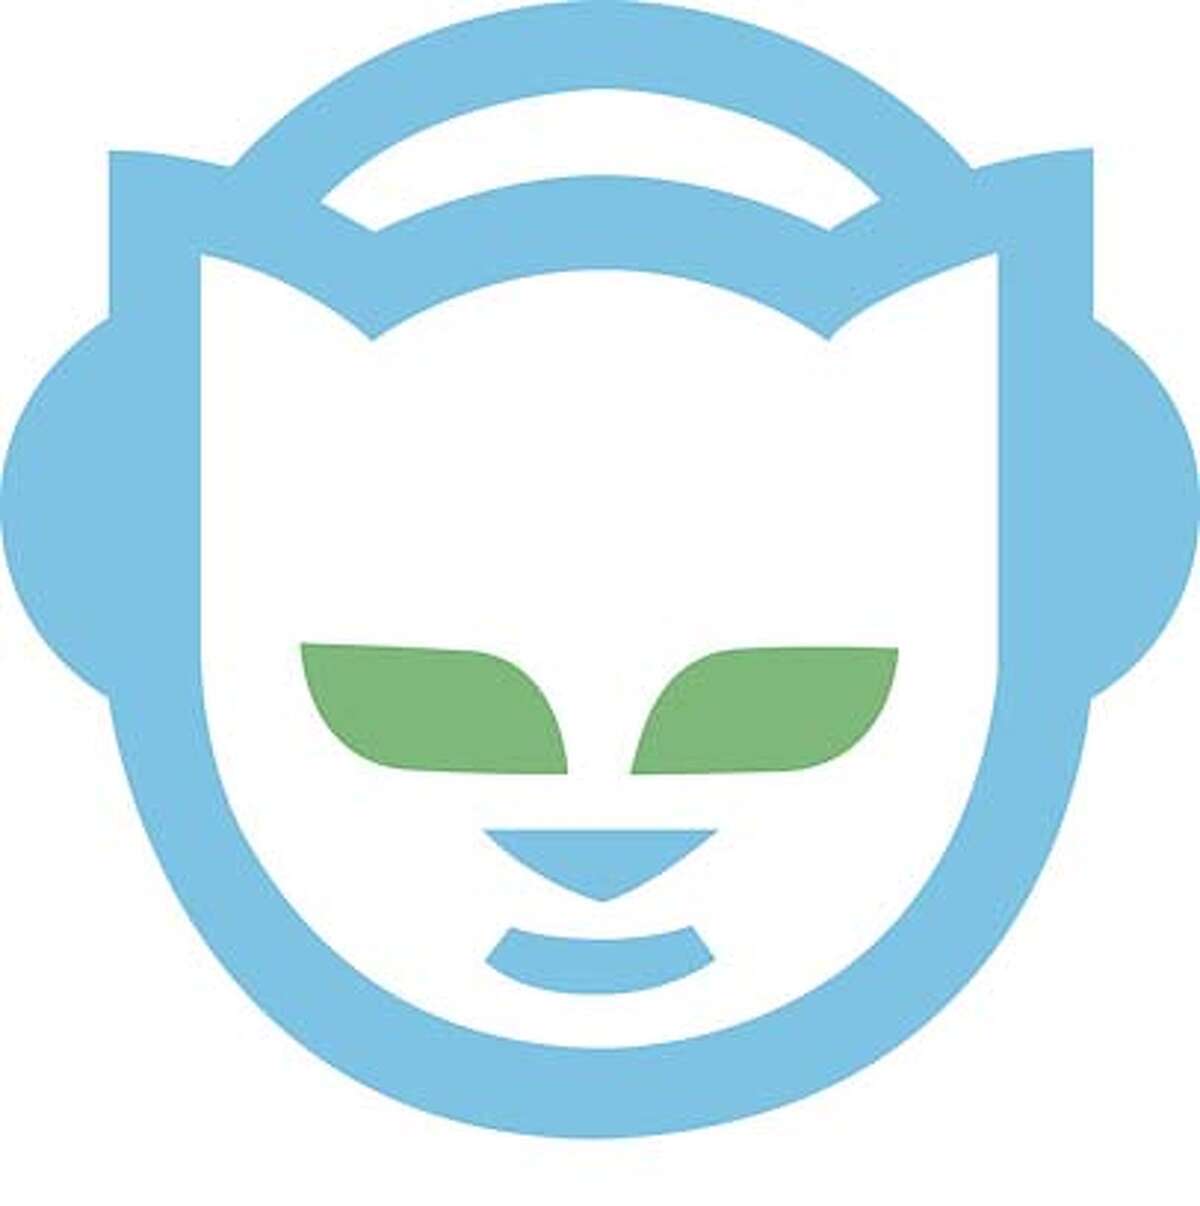 Although the entertainment industry eventually beat Napster (whose logo is shown), it was too late. File sharing lives on.